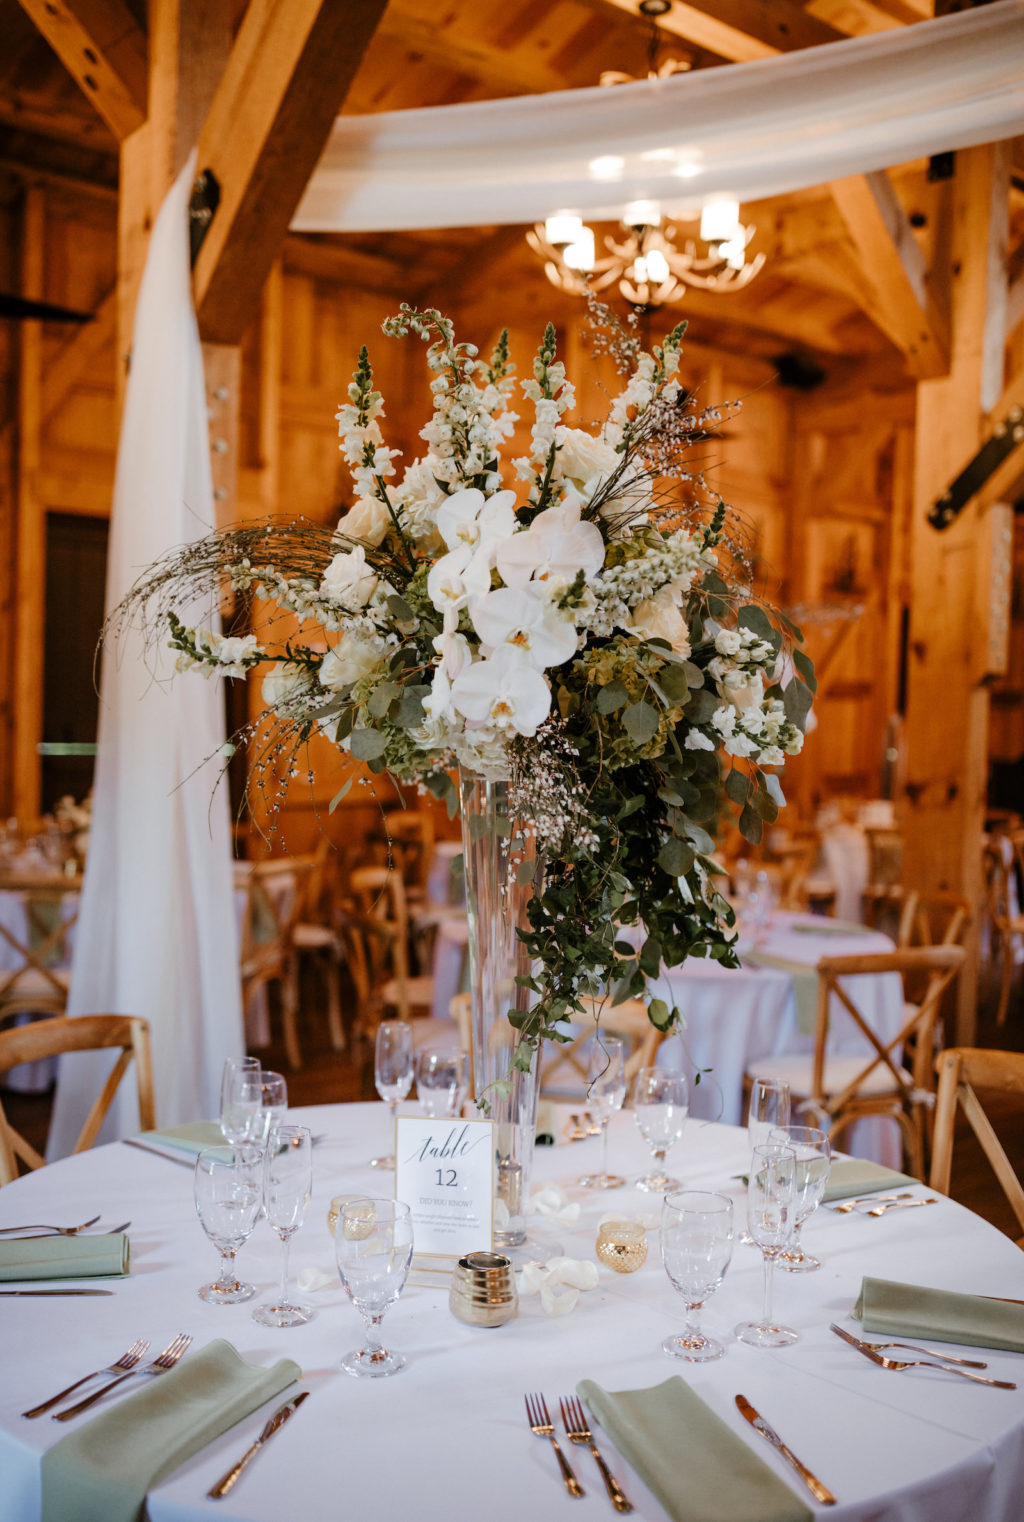 White Orchid Centerpiece with Greenery in Tall Clear Vase | Rustic Wedding Décor for Barn Wedding